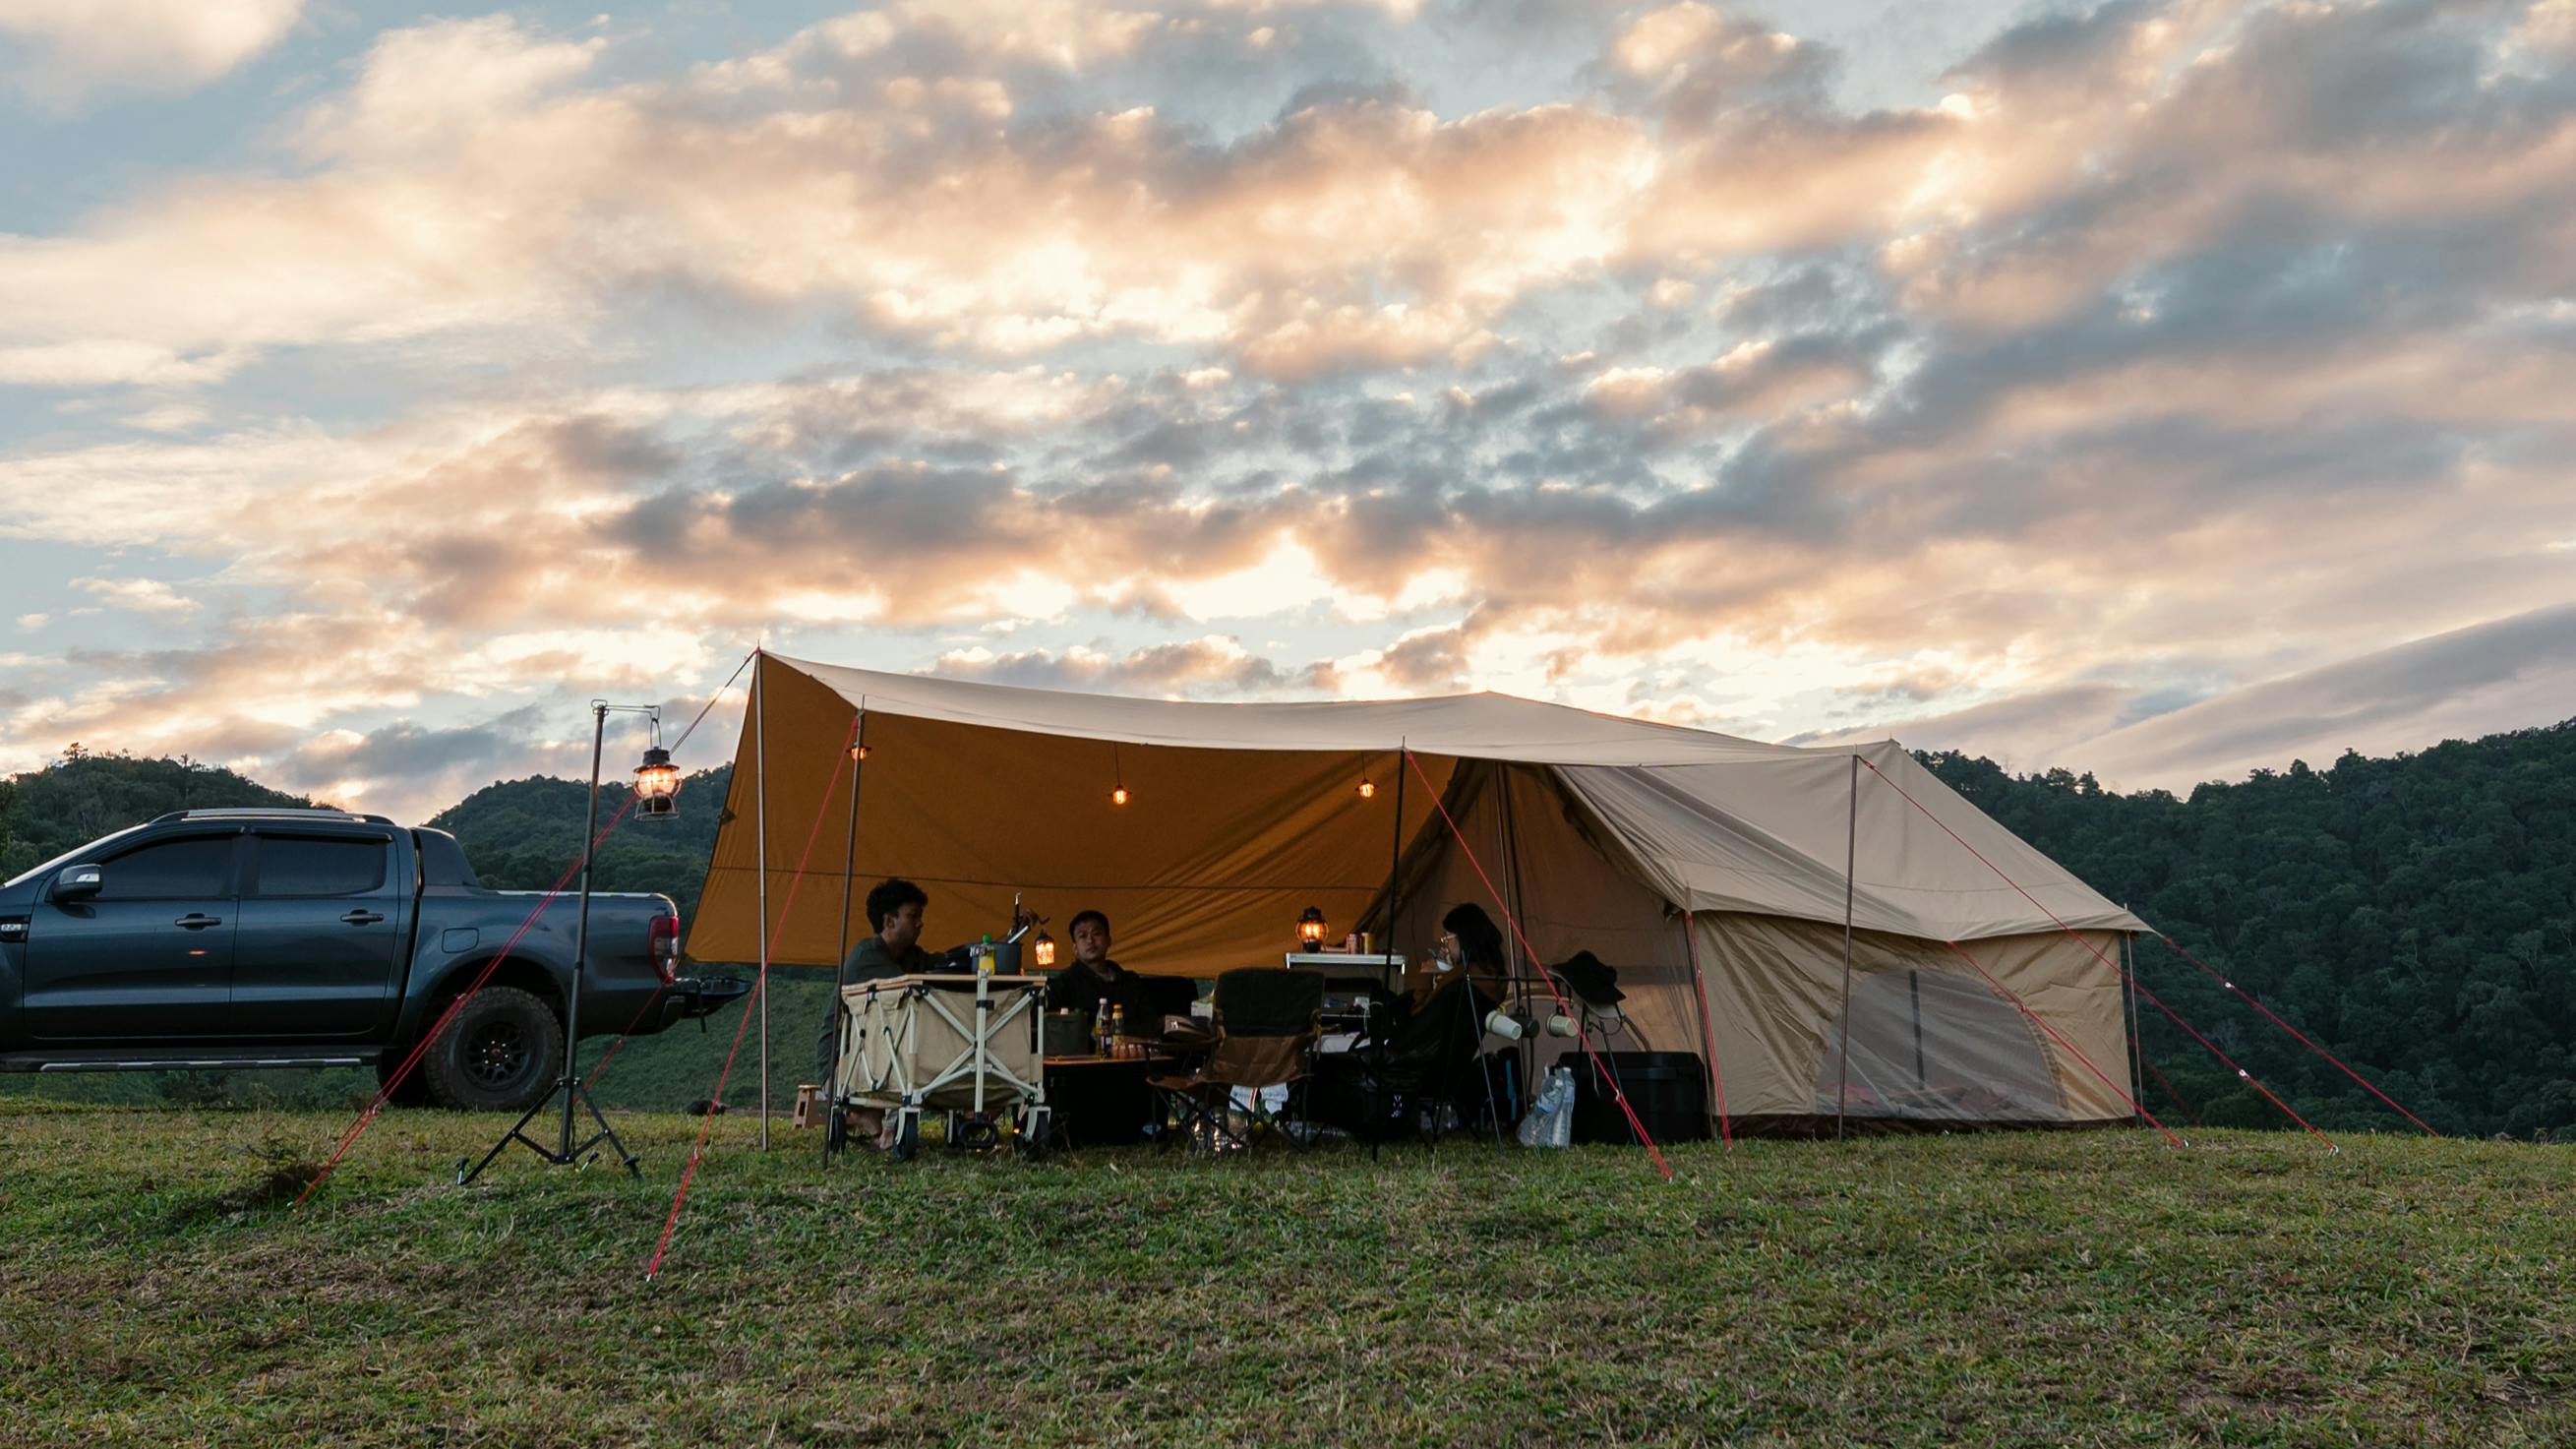 Several campers sit under a shelter outside their tent. A truck is parked next to them and the sun is setting